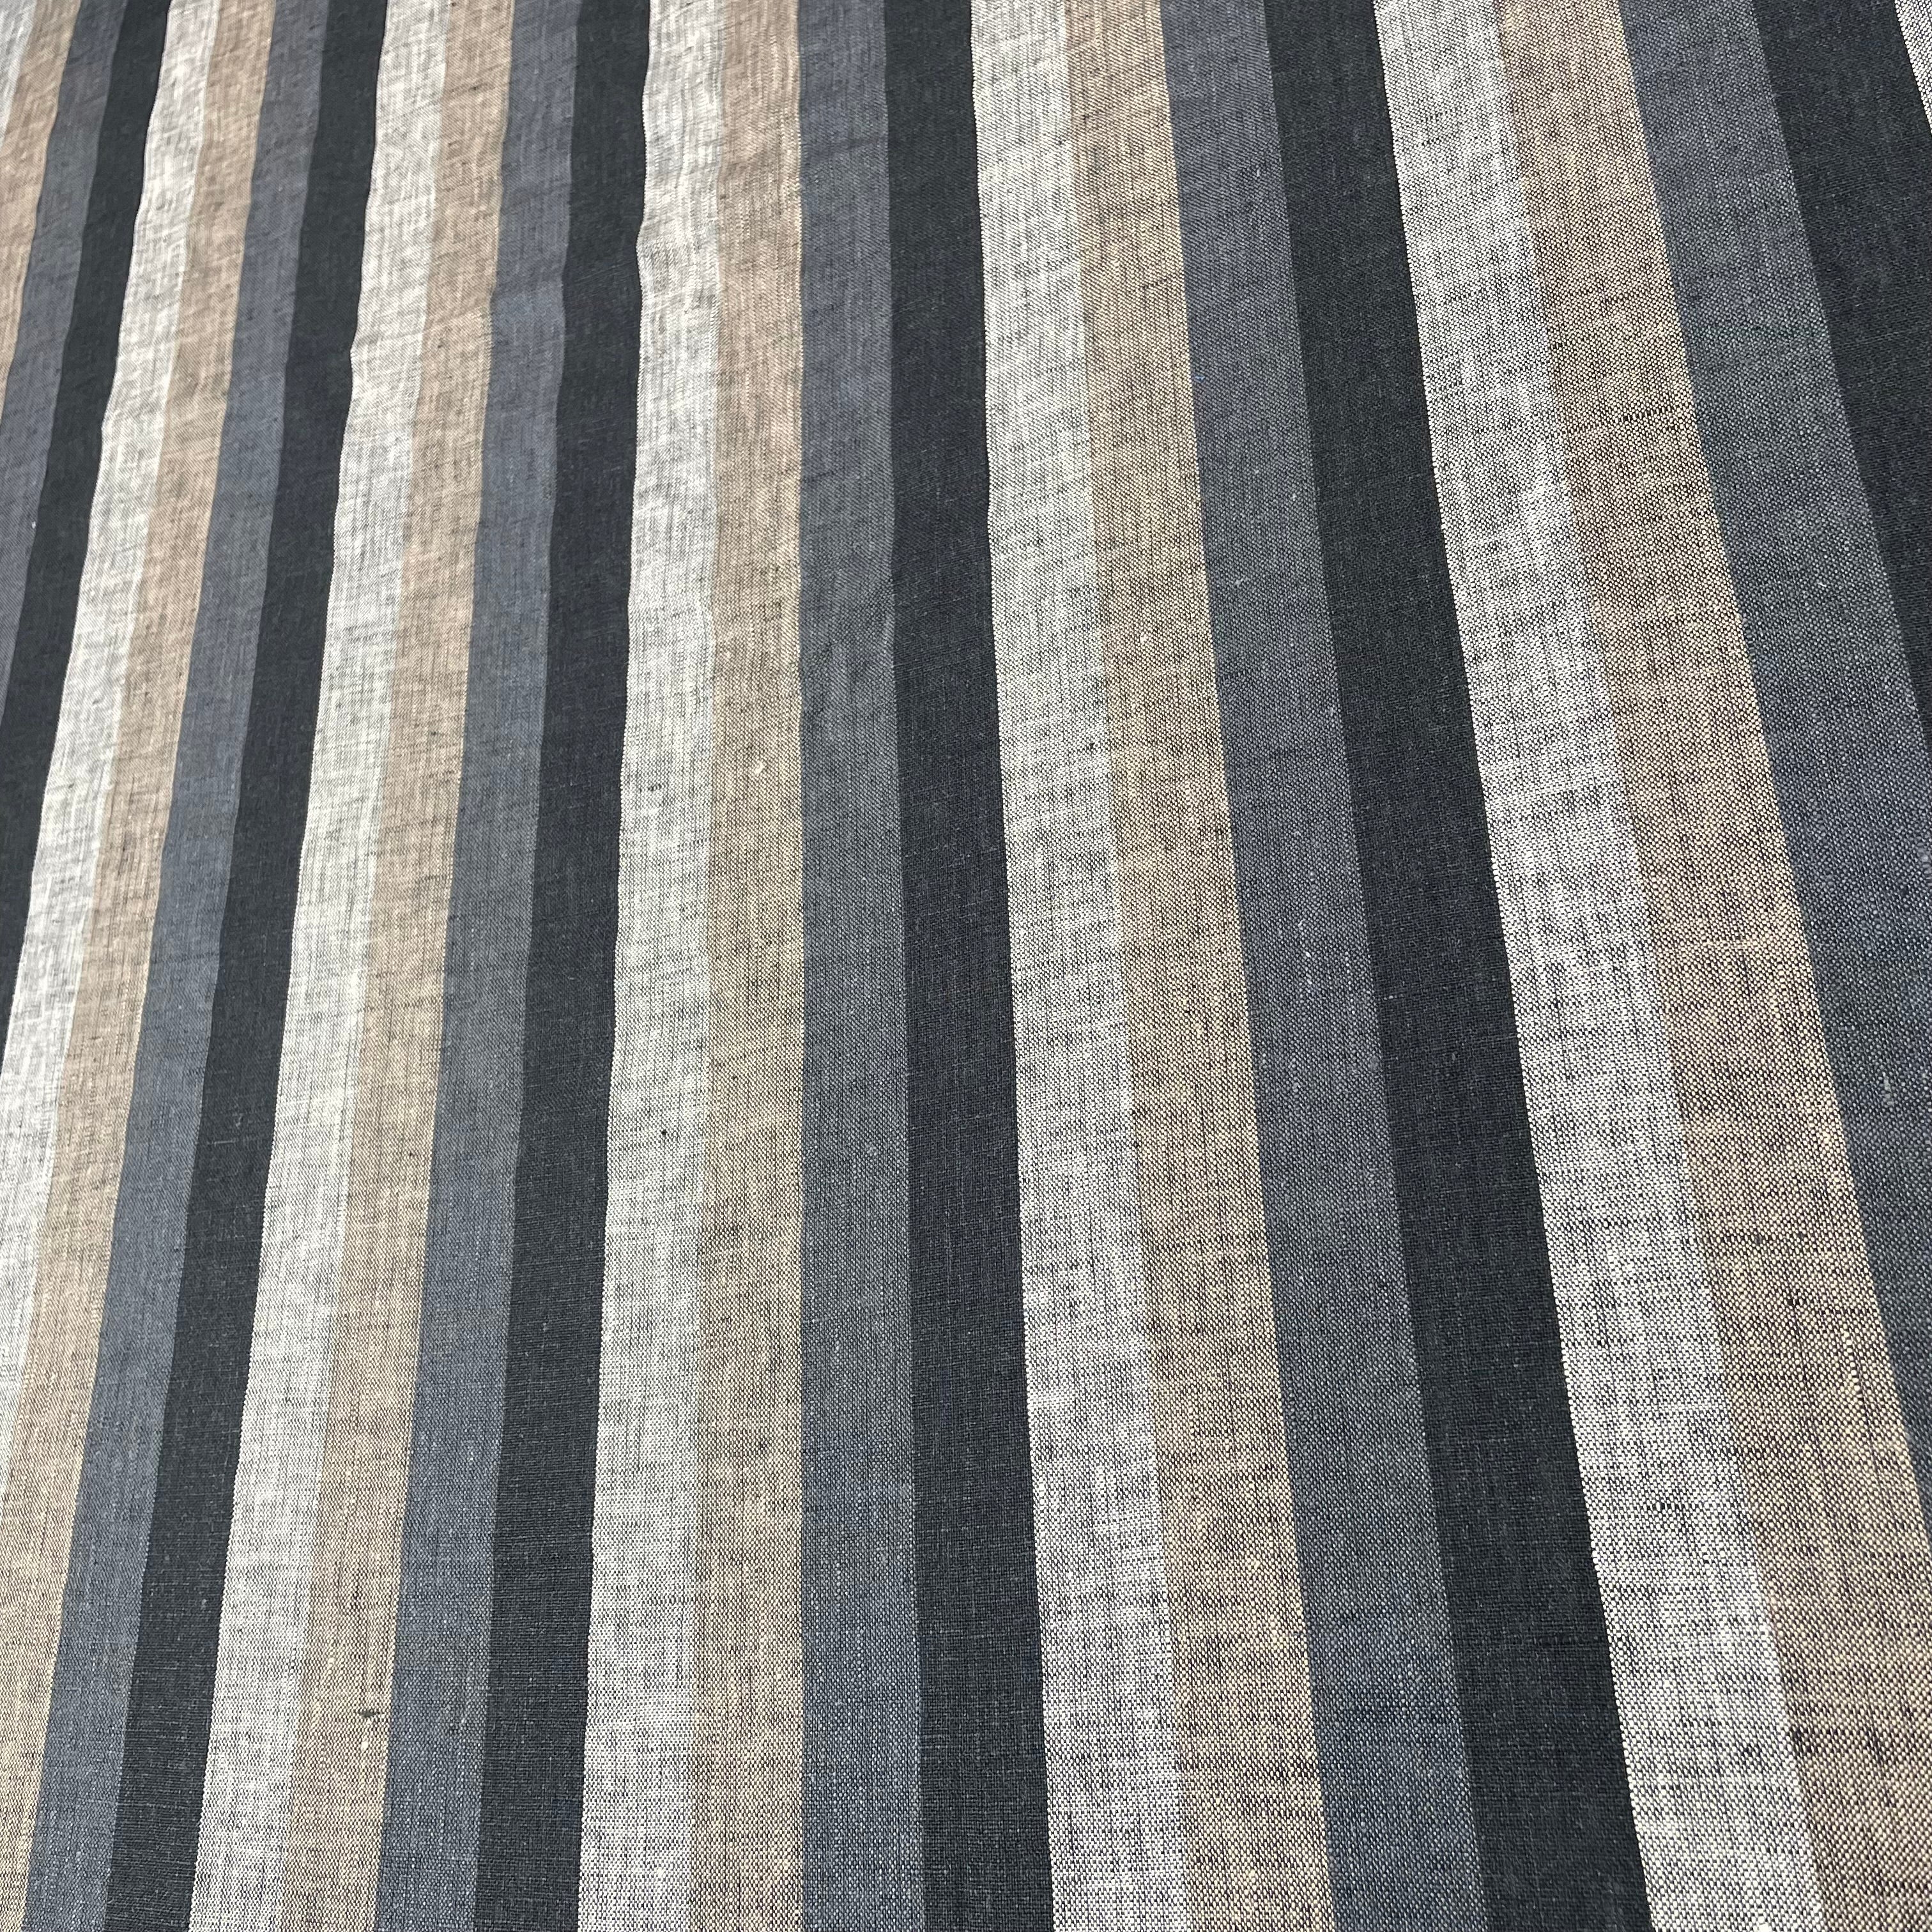 Dark Striped Multi Colors 100% Natural Linen Fabric By The Yard/CL1042